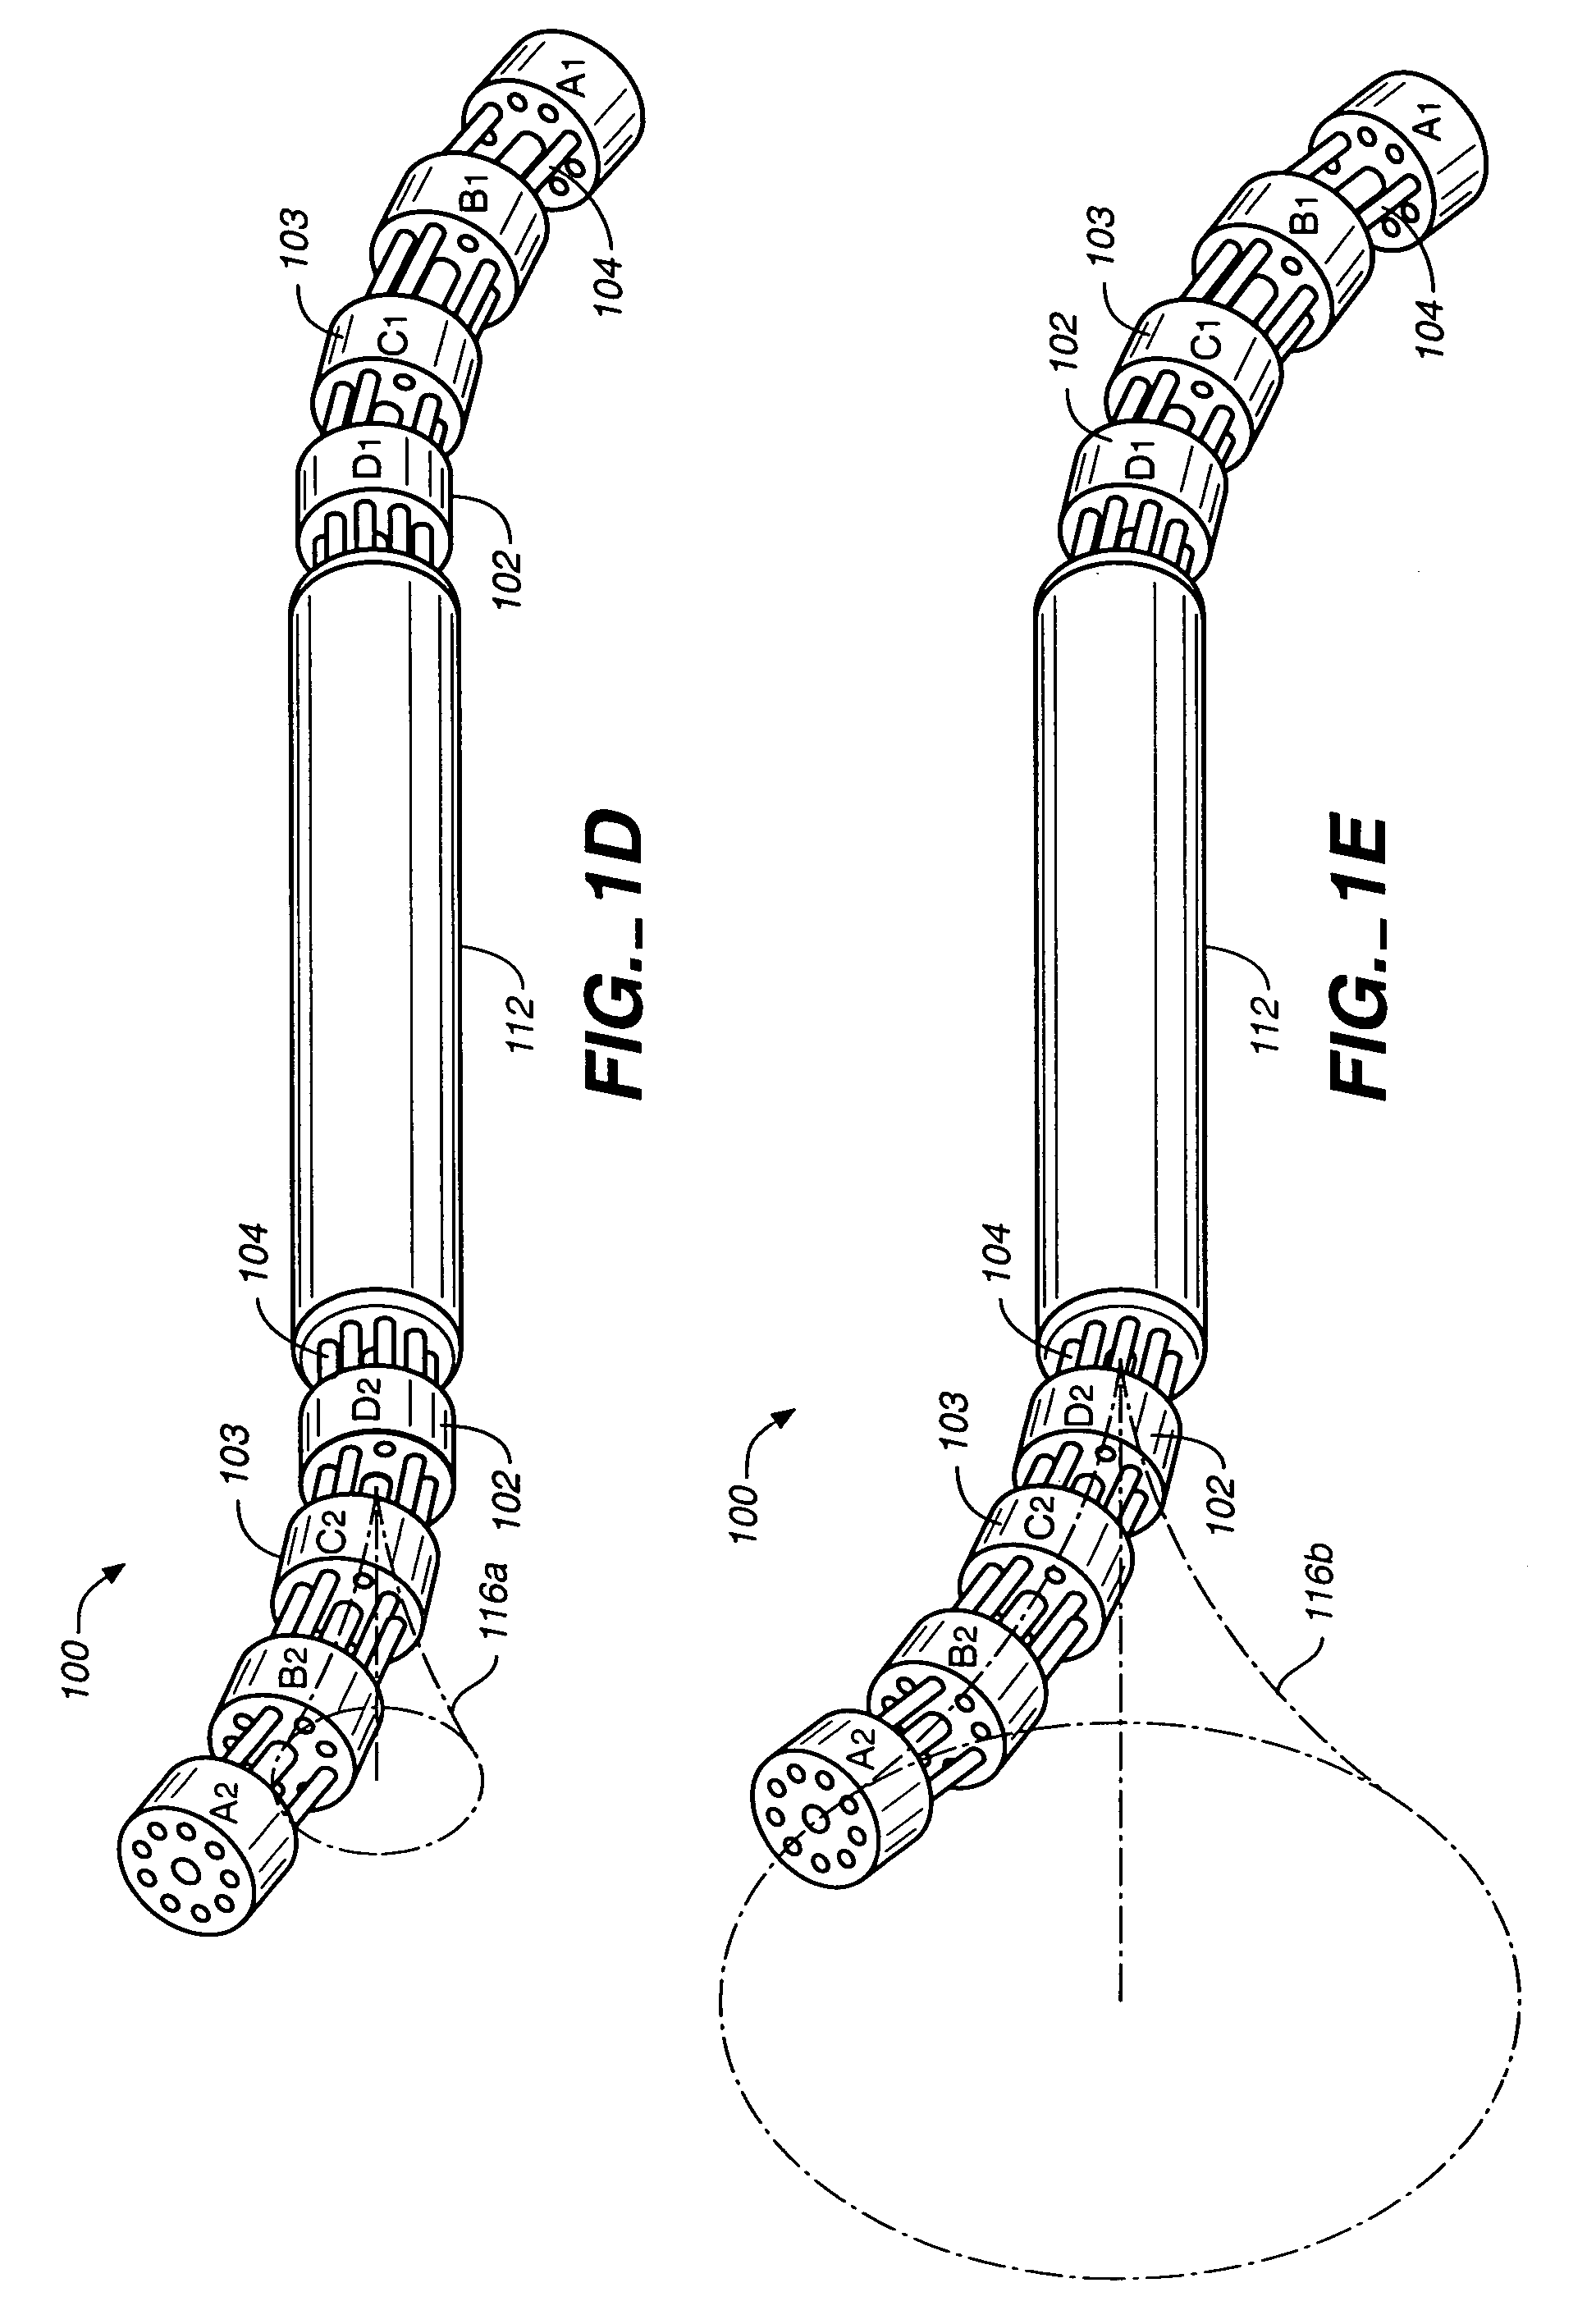 Hand-actuated device for remote manipulation of a grasping tool